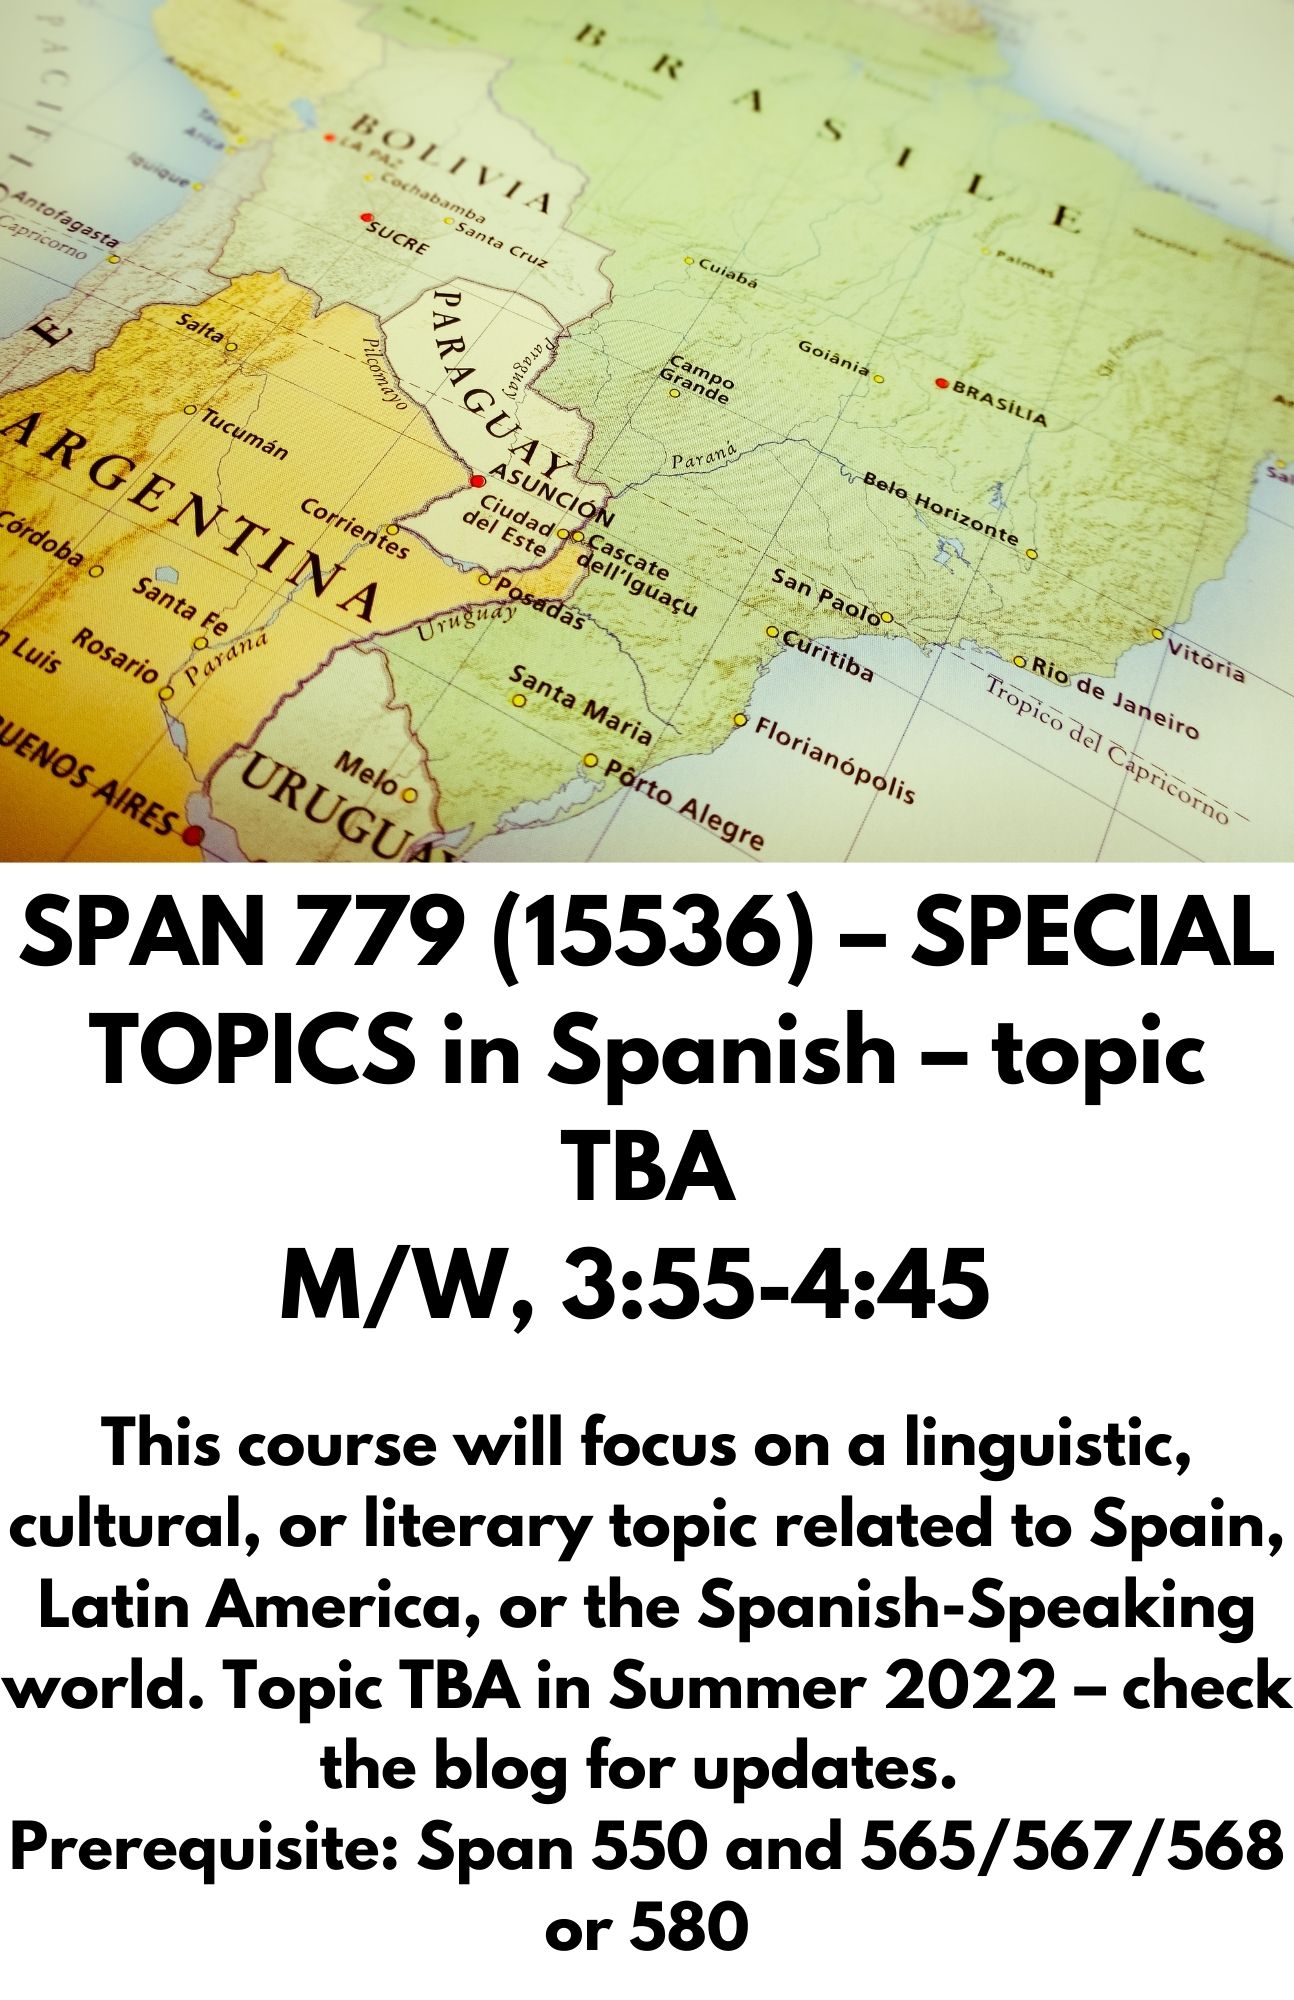 SPAN 779  (15536)– SPECIAL TOPICS in Spanish – topic TBA M/W, 3:55-4:45 / Visiting Professor of Spanish M W 3:55 - 5:10 p.m.   This course will focus on a linguistic, cultural, or literary topic related to Spain, Latin America, or the Spanish-Speaking world. Topic TBA in Summer 2022 – c